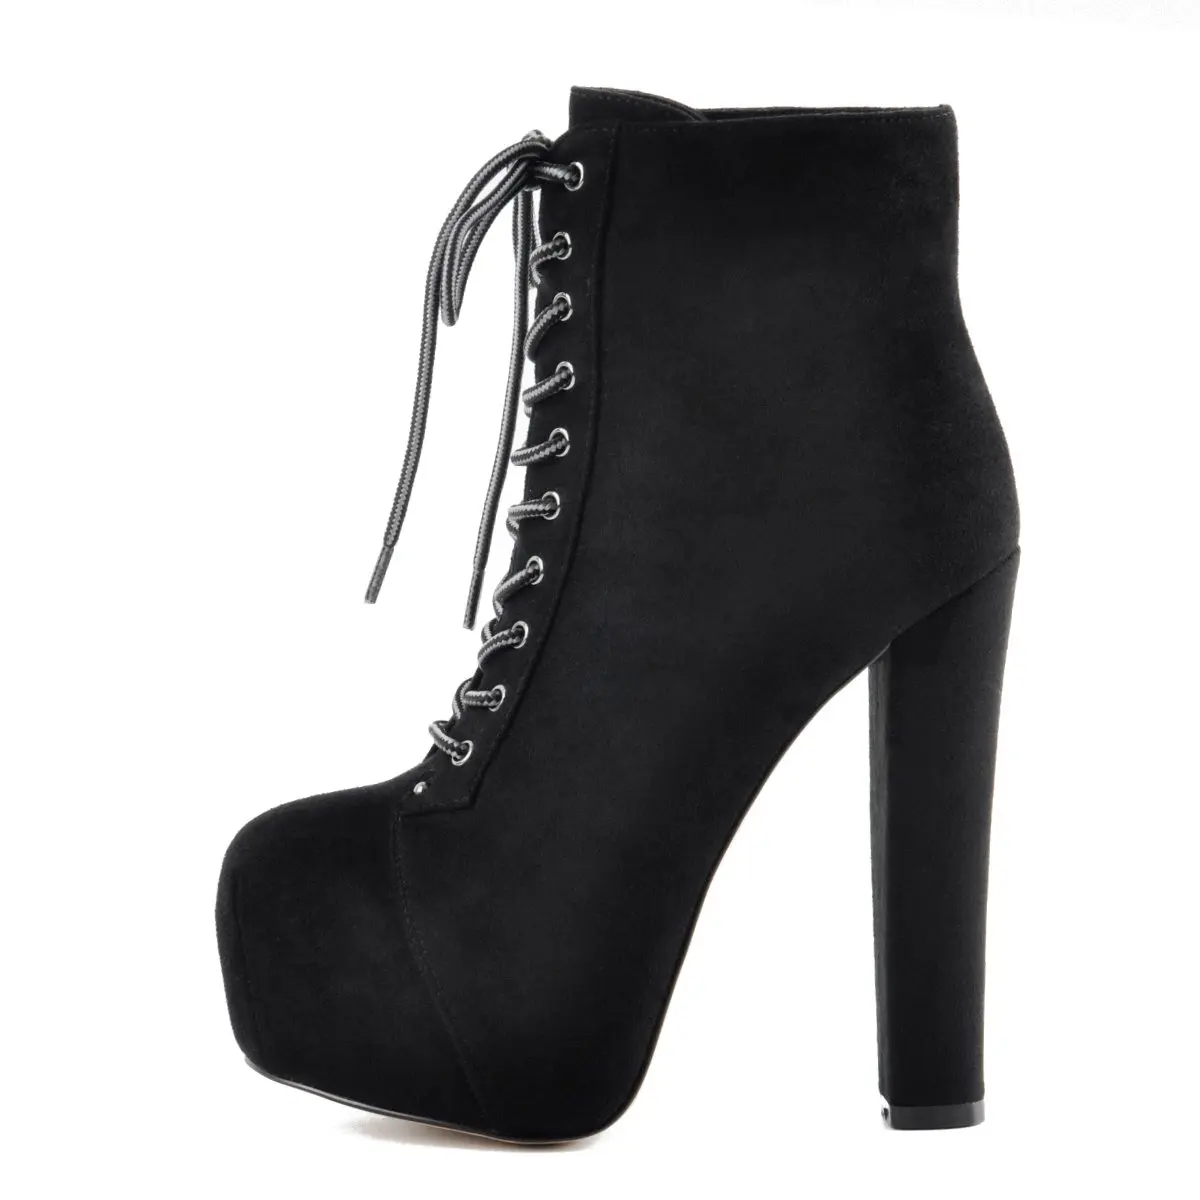 gehandicapt Of anders toevoegen aan Black Suede Platform Round Toe Lace Up Chunky High Heel Ankle Boots Women  Shoes - Buy Bare Heel Back Lacing Dancing Performance Low Ankle Boots Sexy  Ultra High Heel Waterproof Platform,Fashion Ladies